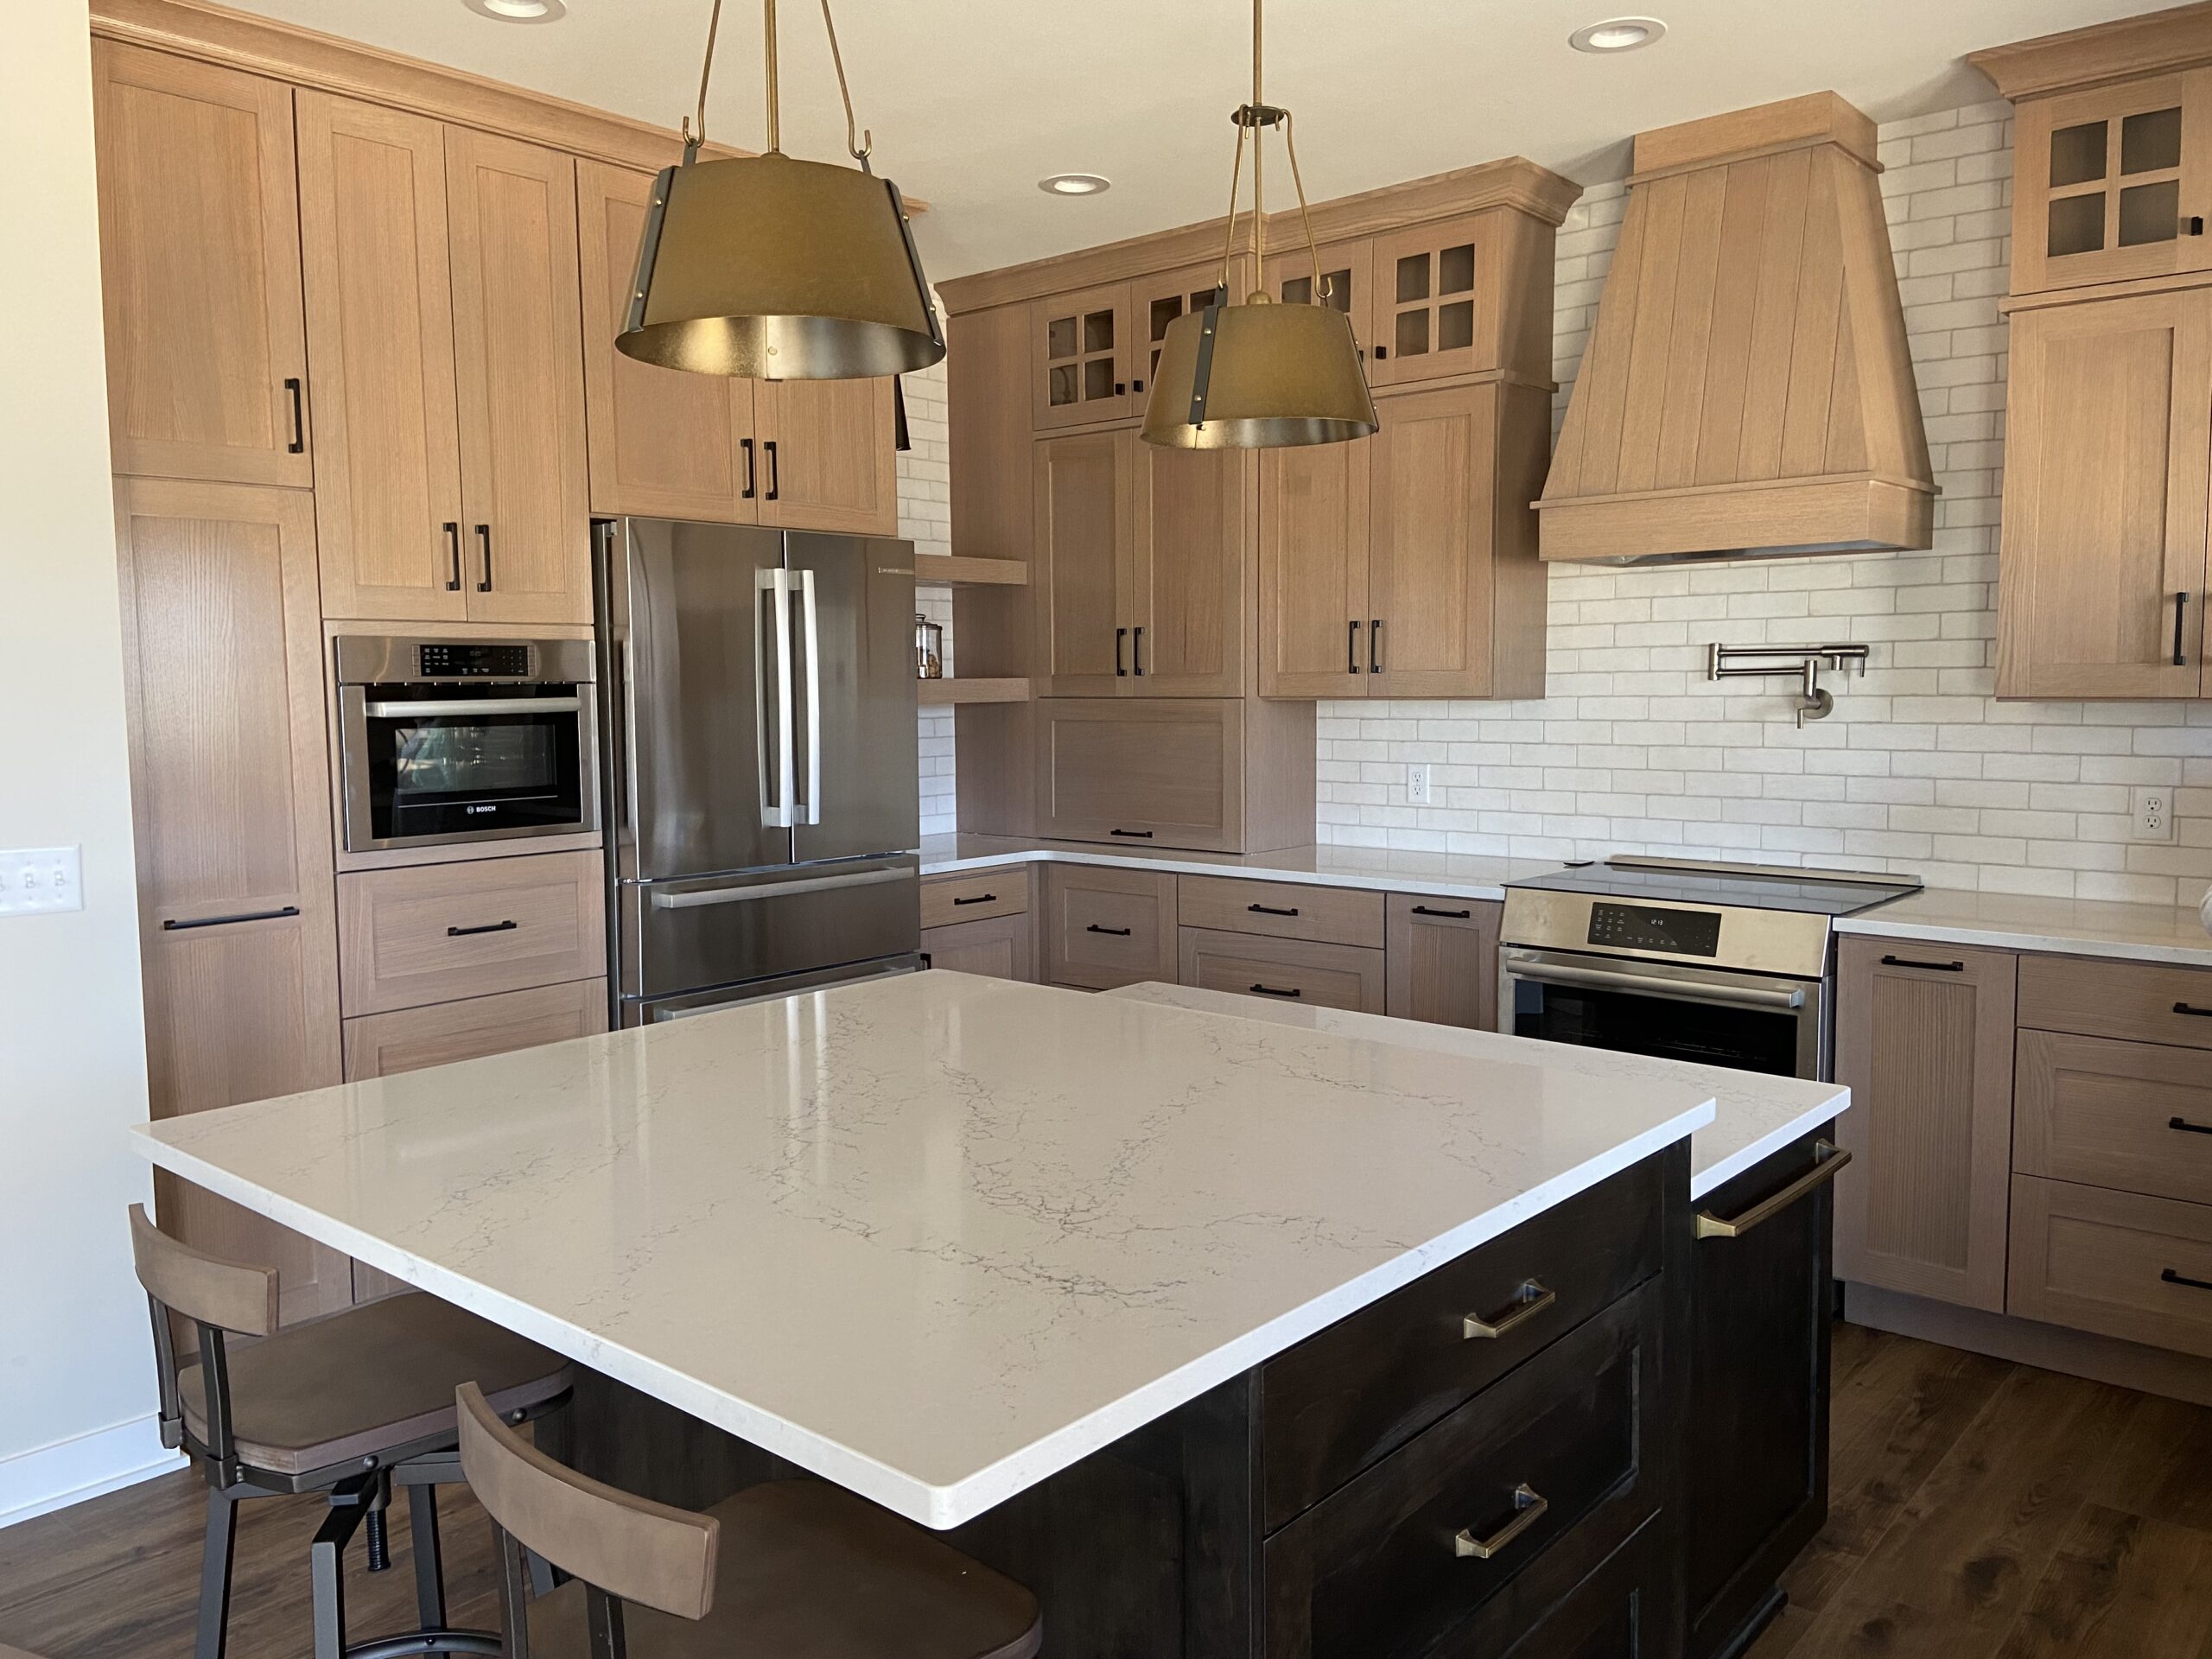 Custom kitchen cabinets and countertops in Faribault, MN